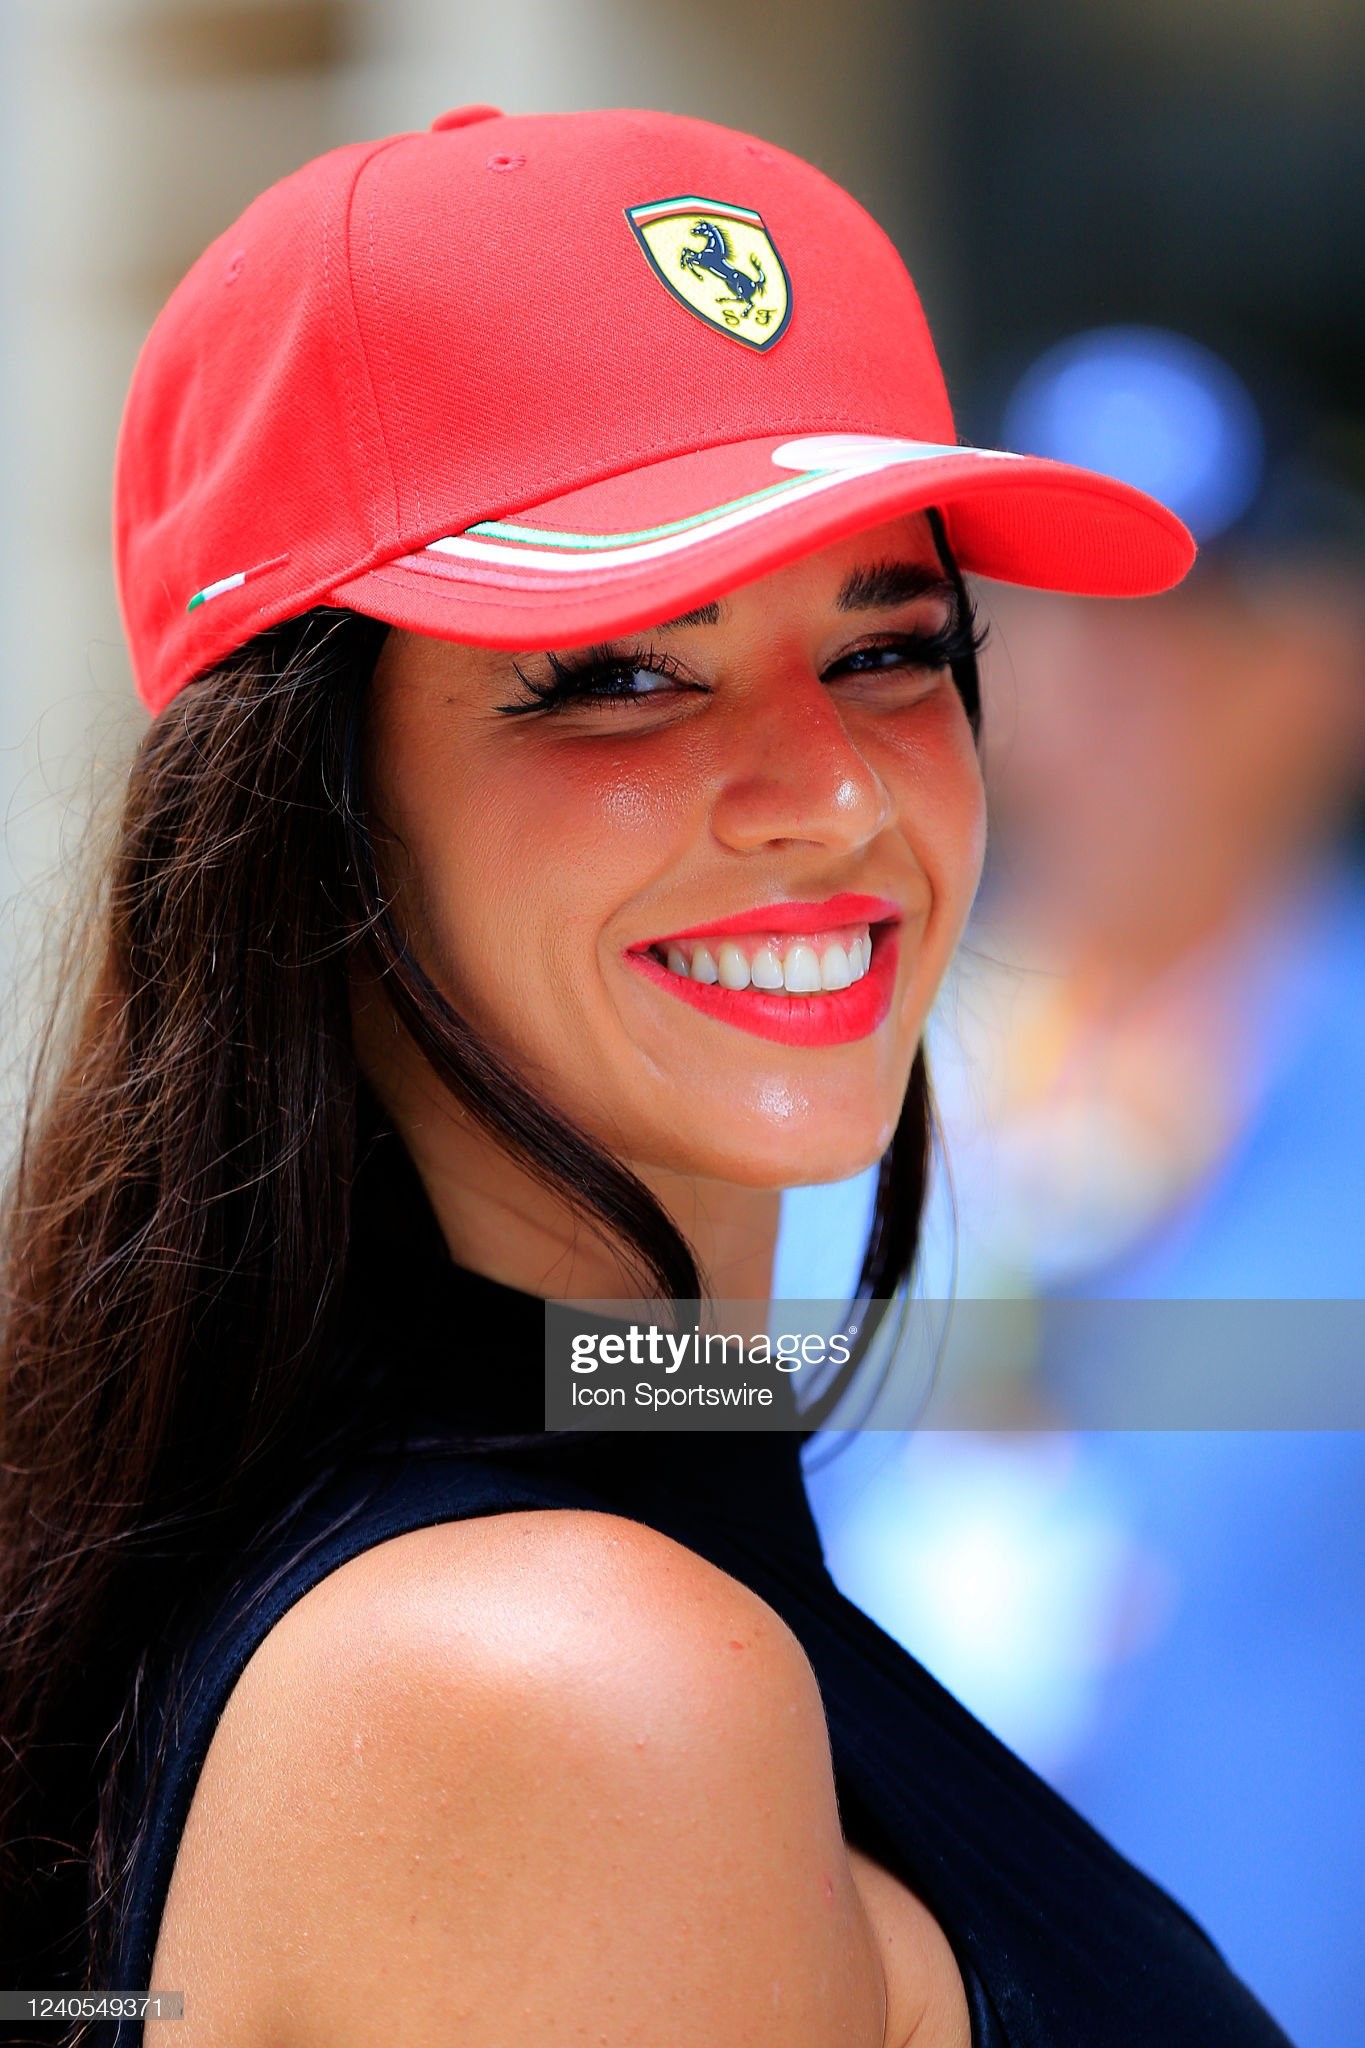 A Ferrari female fan smiles for the camera prior to the first running of the Miami Grand Prix on May 08, 2022 at the Miami International Autodrome in Miami Gardens, Florida. 